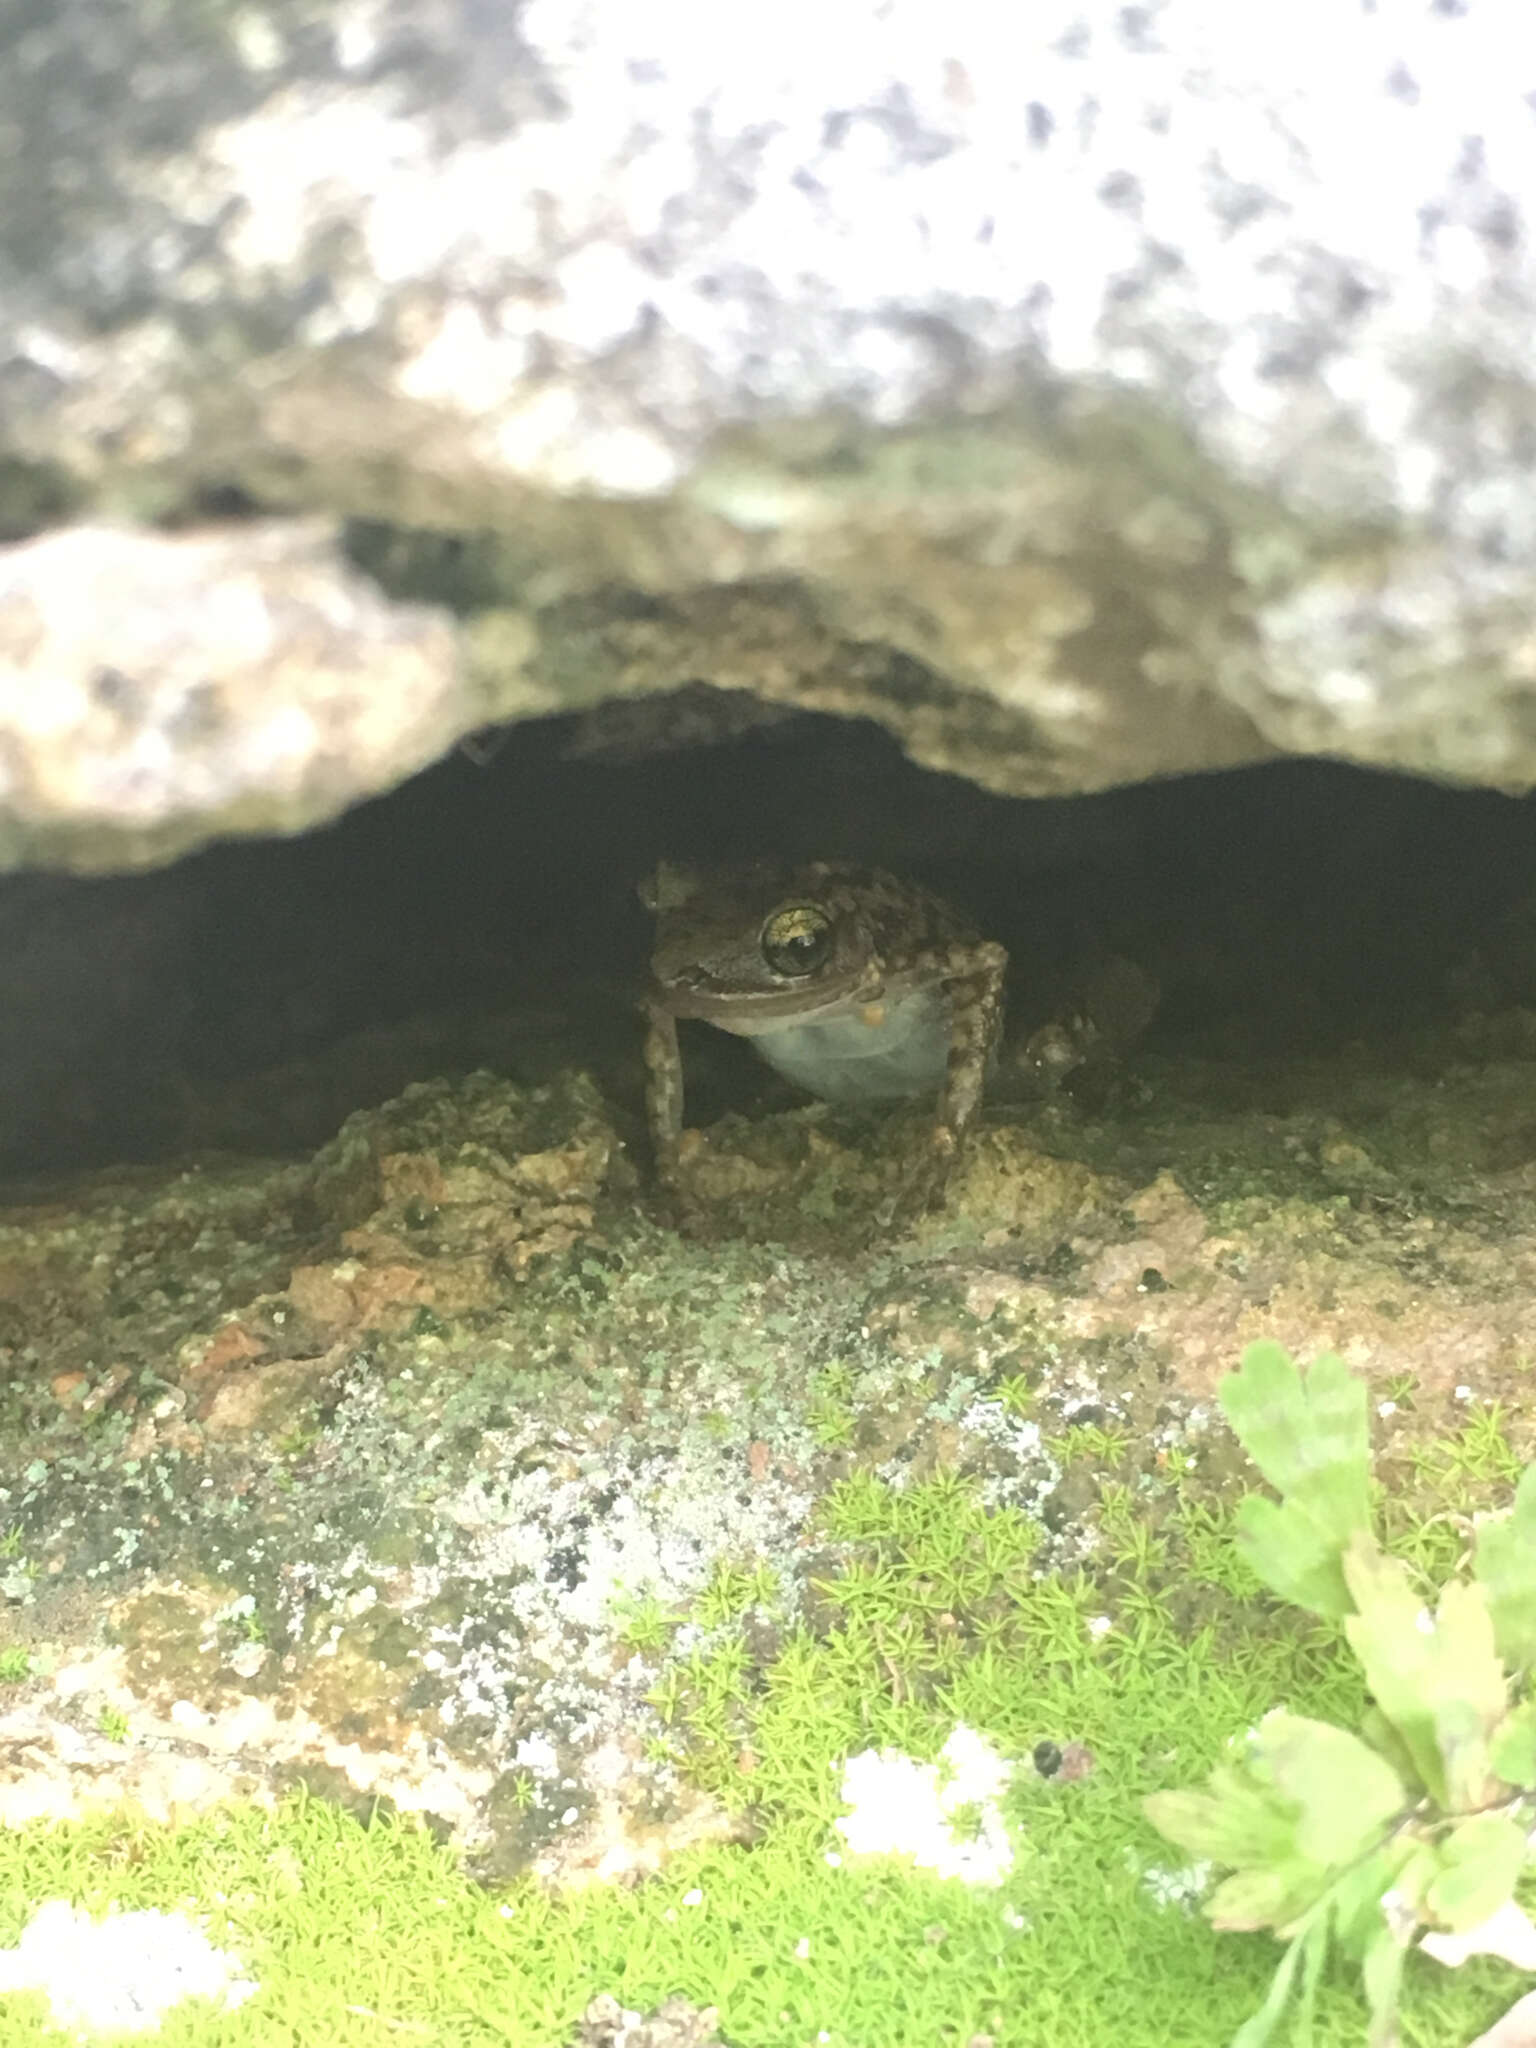 Image of Cliff Chirping Frog